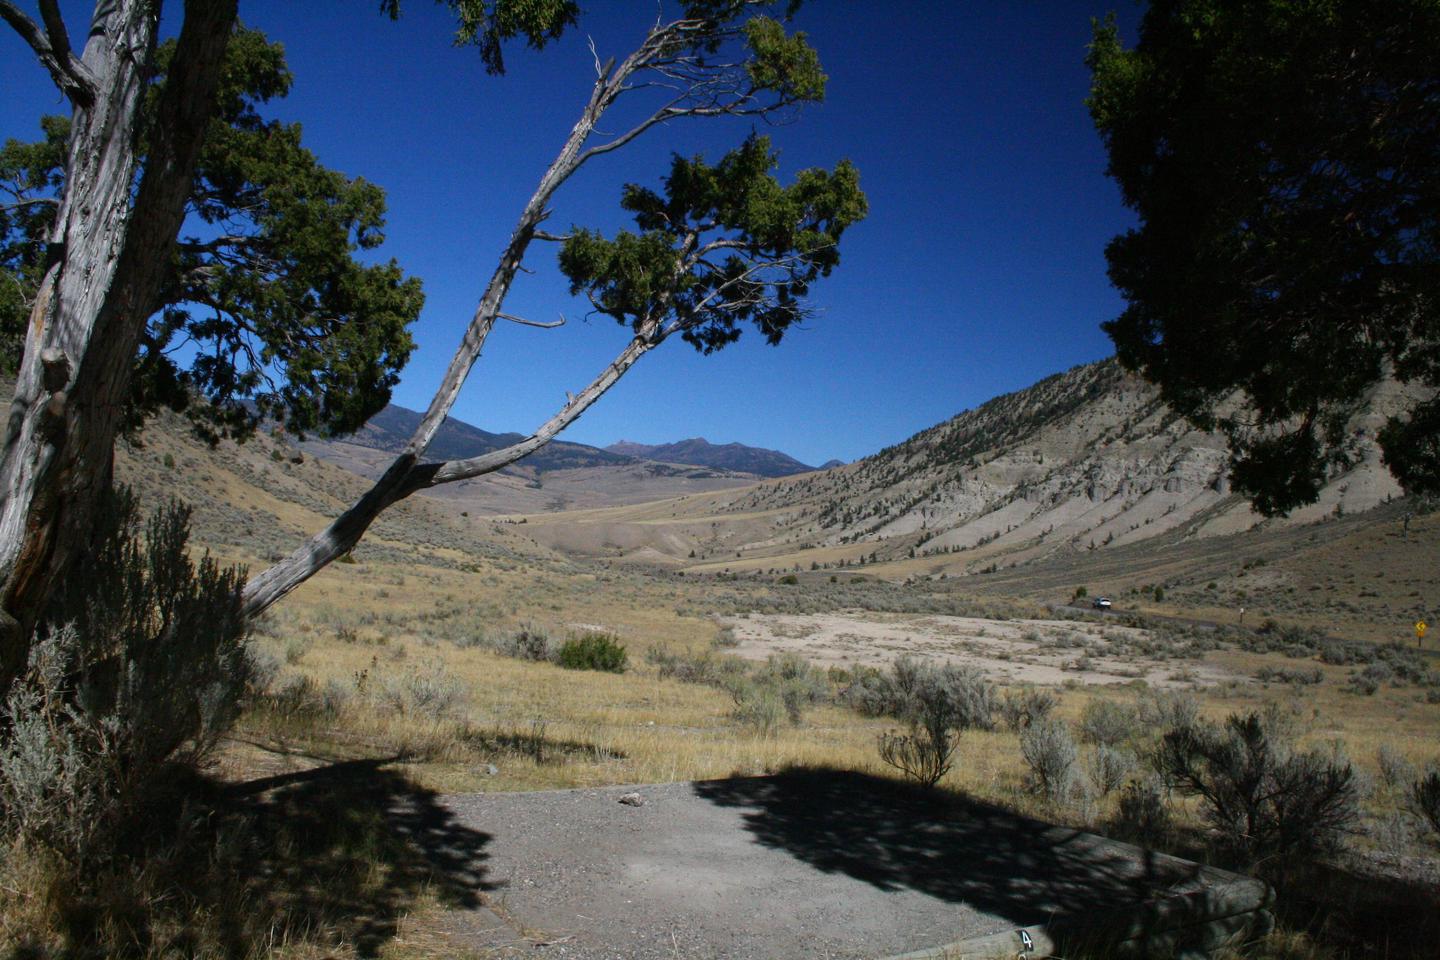 Mammoth Hot Springs Campground Site 34Mammoth Campsite #34, looking northward